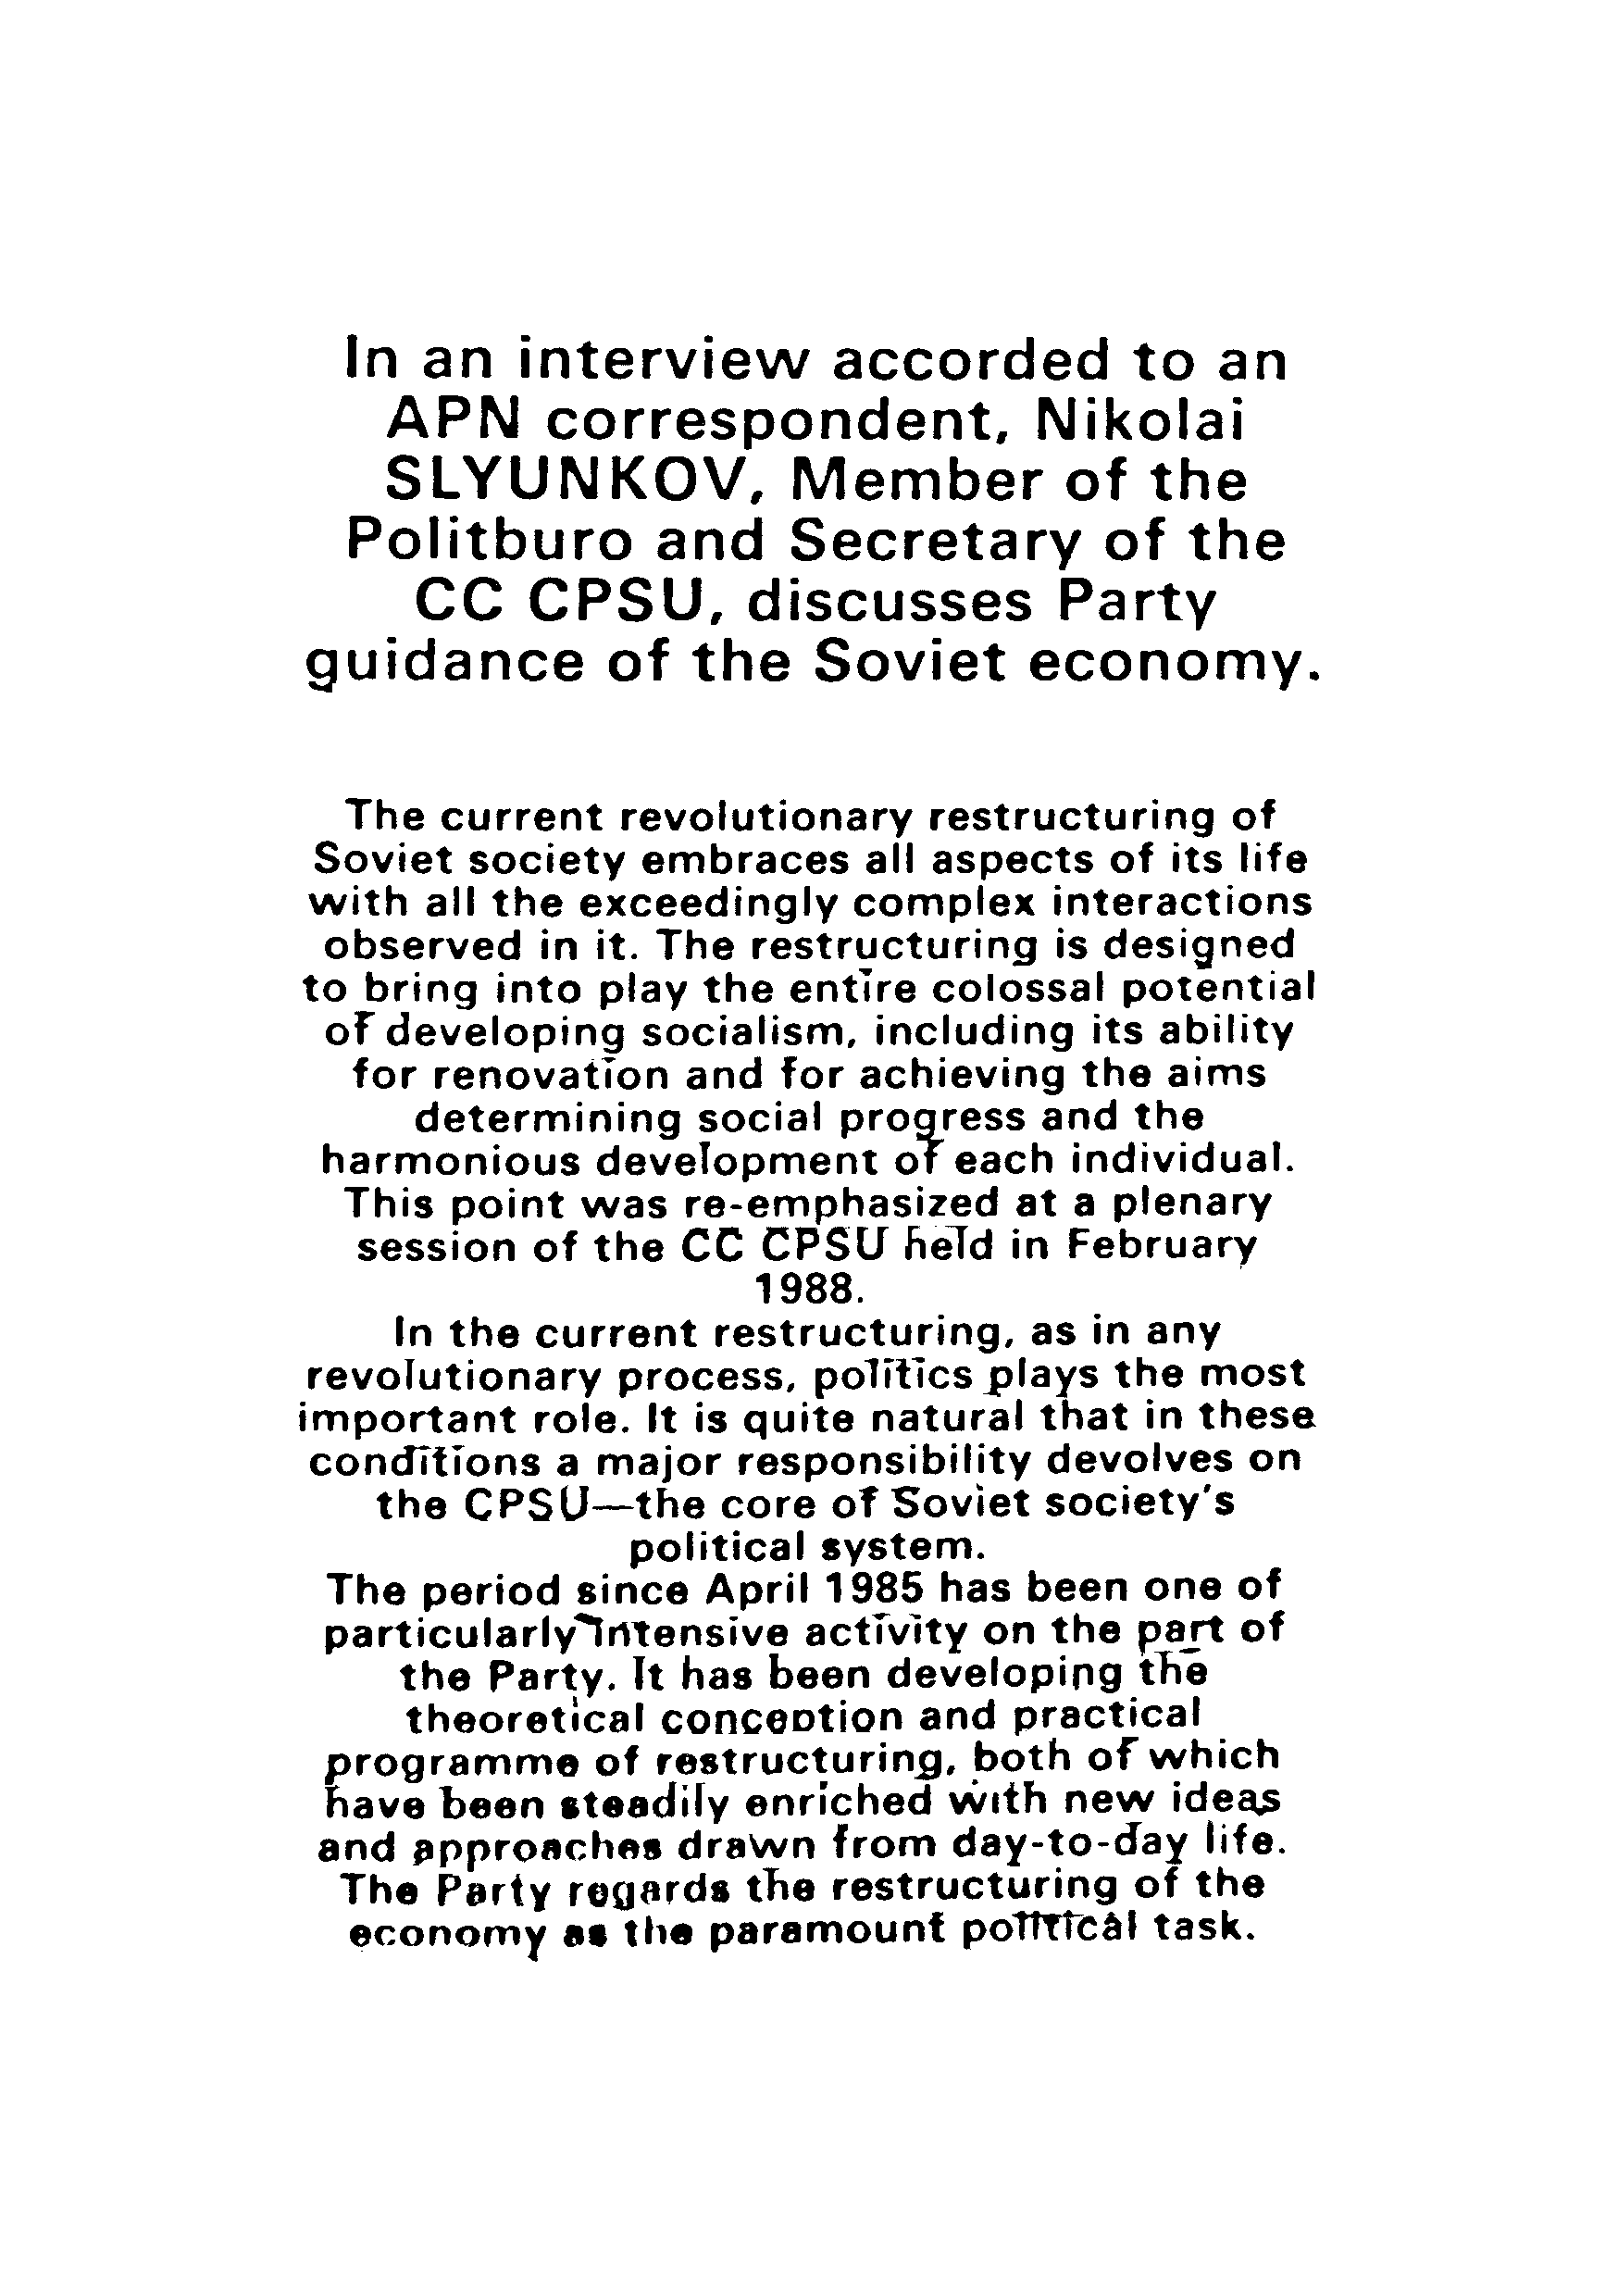 IN AN INTERVIEW ACCORDED TO AN  APN CORRESPONDENT,NIKOLAI SLYUNKOV,MEMBER OF THE POLITBURO AND SECRETARY OF THE CC CPSU, DISCUSSES PARTY GUIDANCE OF THE SOVIET ECONOMY.